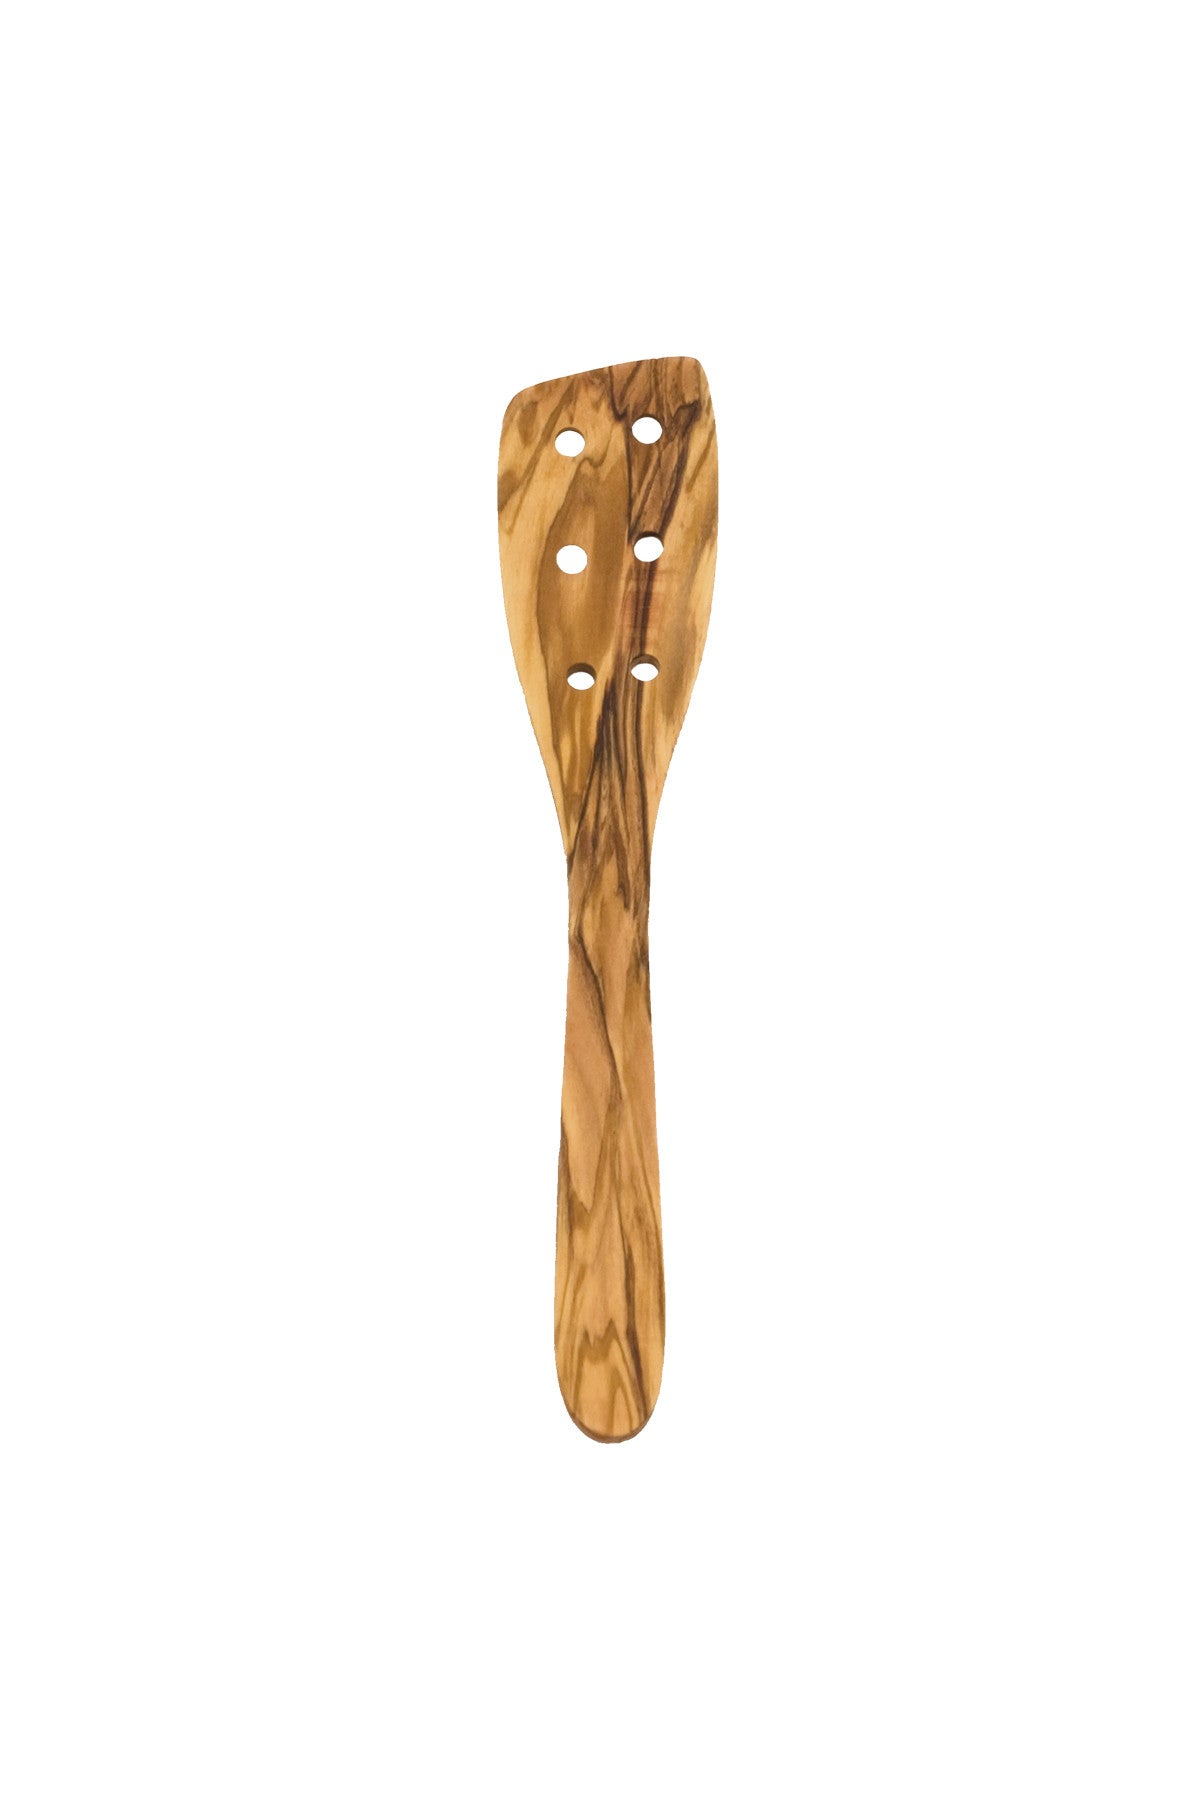 SPATULA WITH HOLES OLIVE WOOD 30 CM